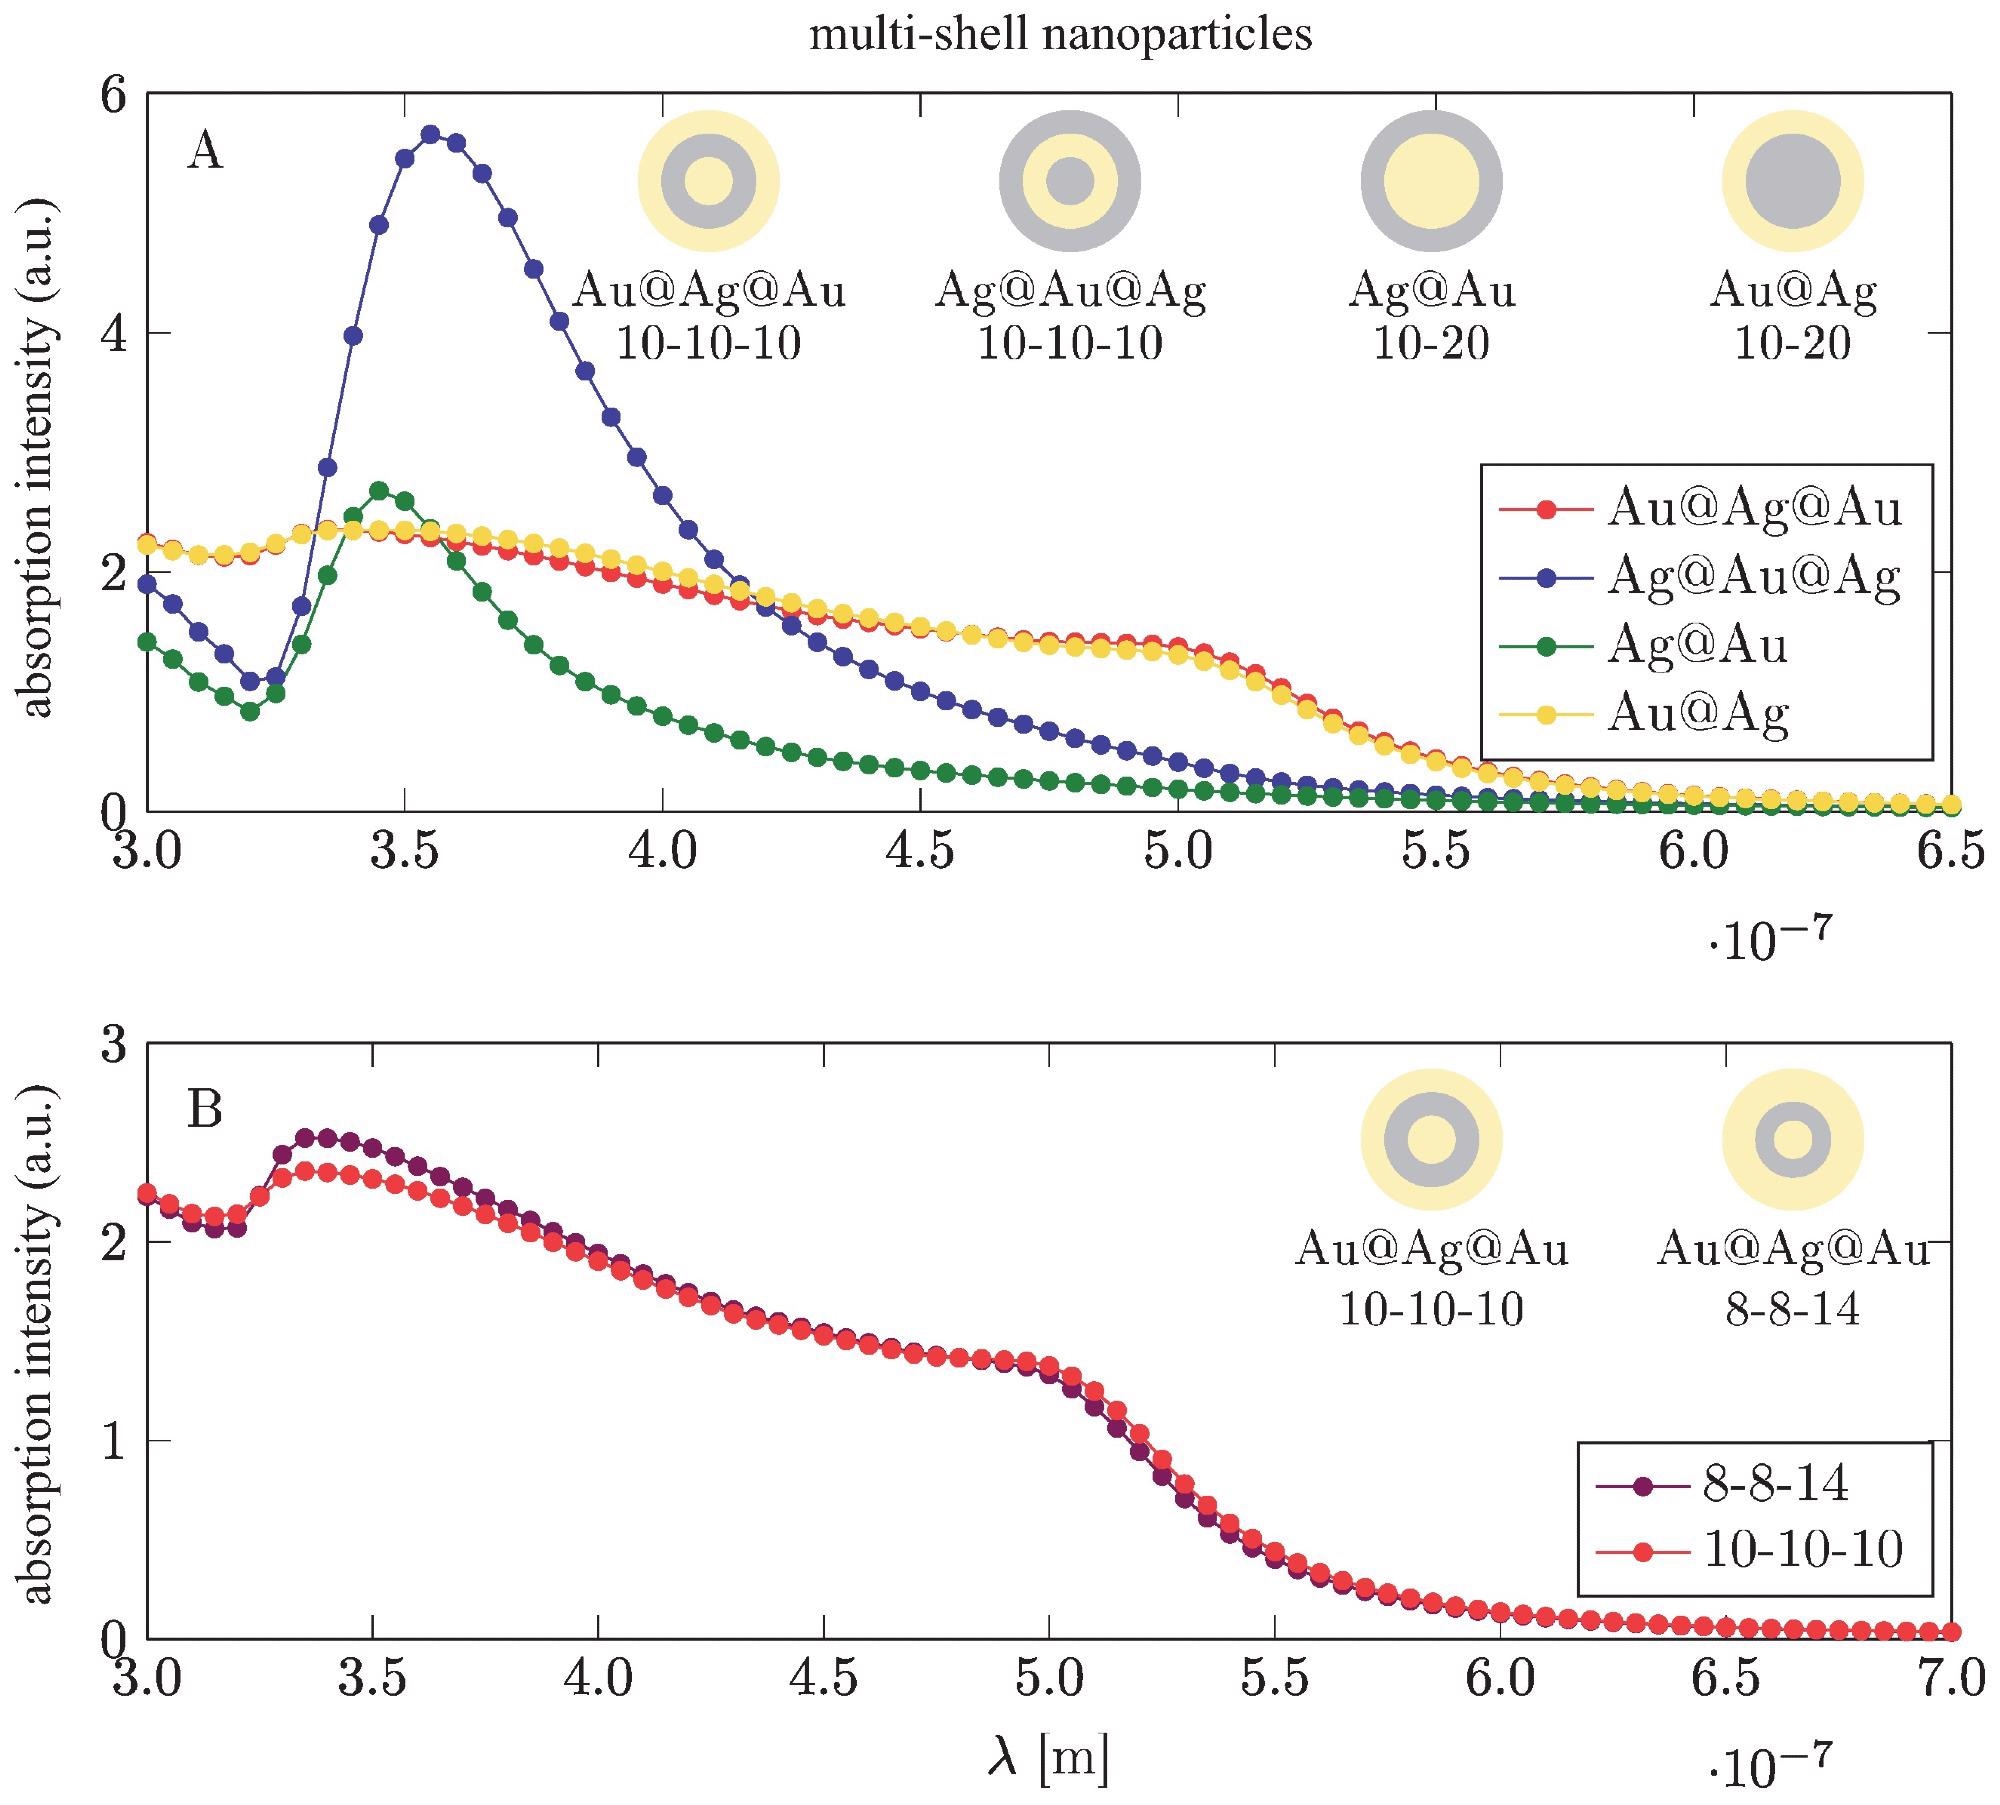 Flattening and elongation of the dipole surface plasmon resonance in multi-shell-core metallic nanoparticles. Thicknesses of shells are shown in nanometers [45] (Comsol simulation).